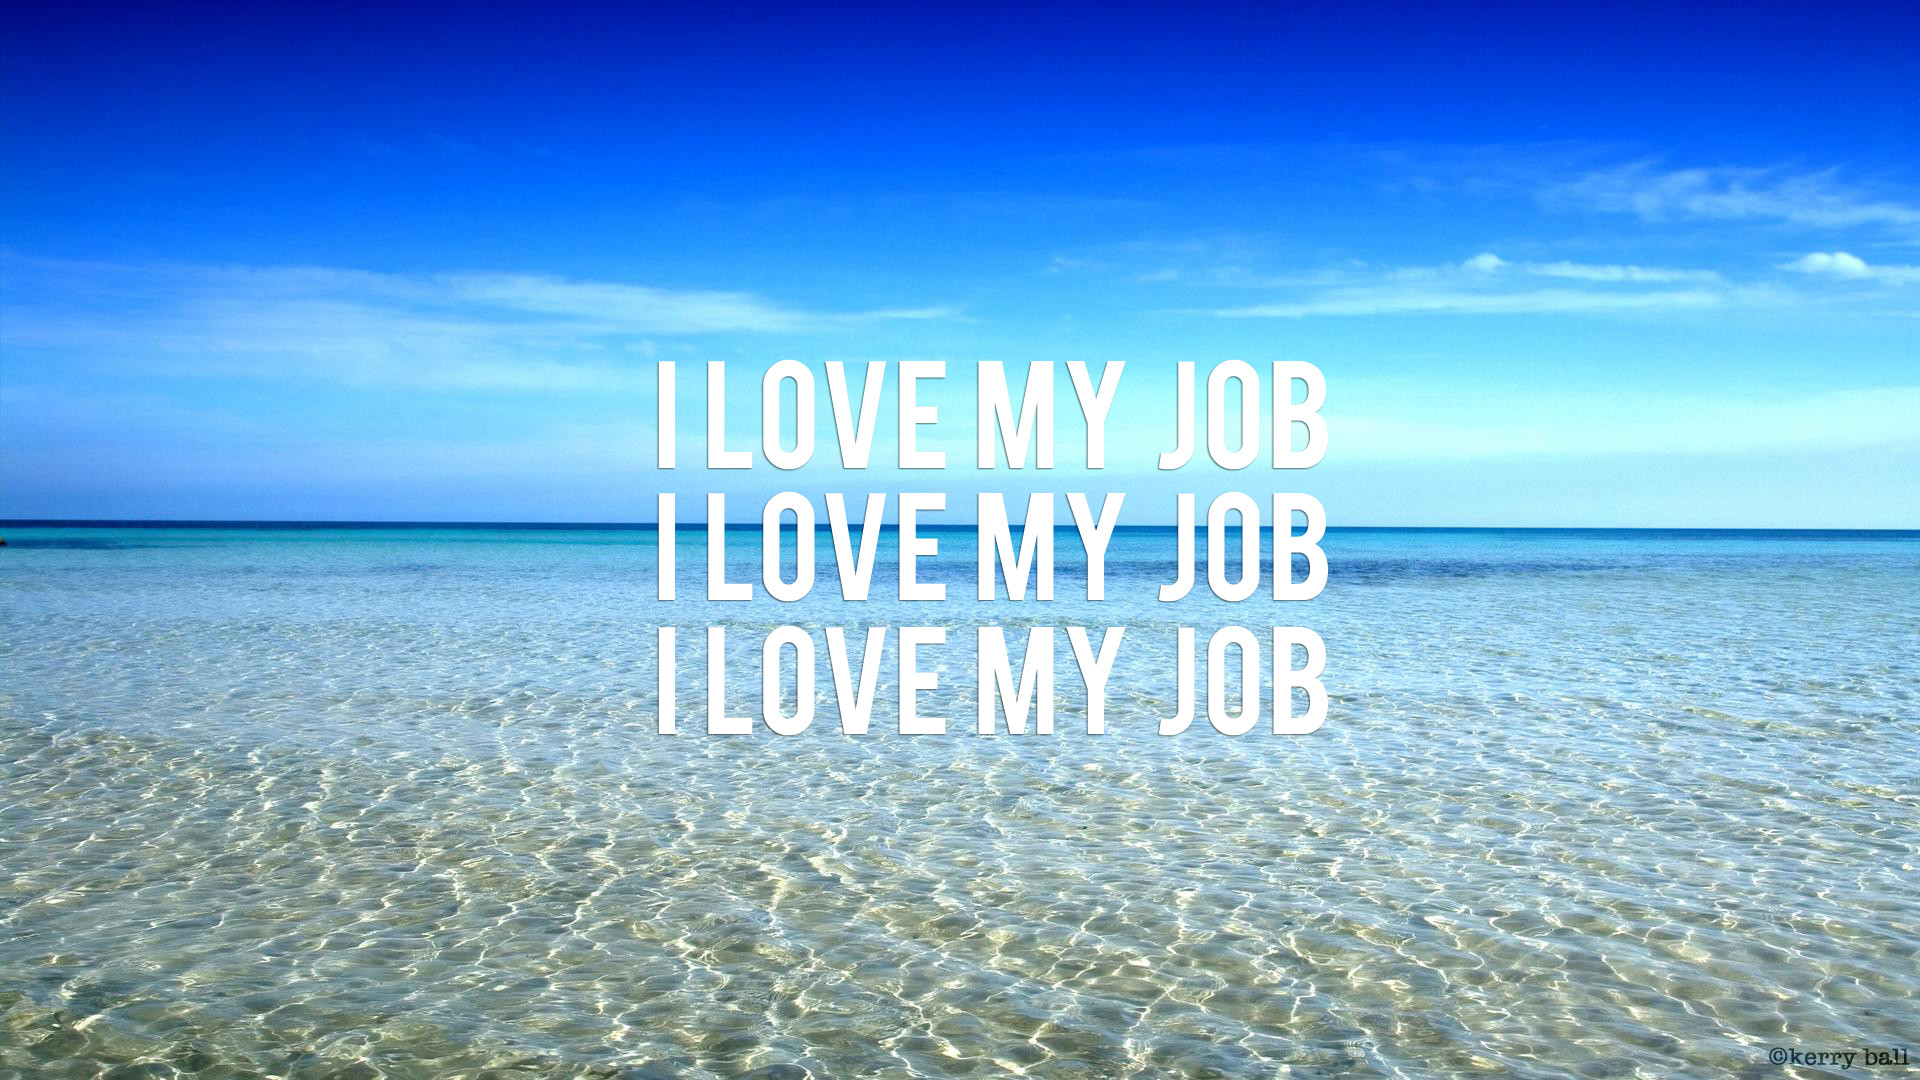 1920x1080 "I LOVE MY JOB" desktop wallpaper. I made this the other day, for my  computer at work. I wanted something pretty (but amusing) to look at!